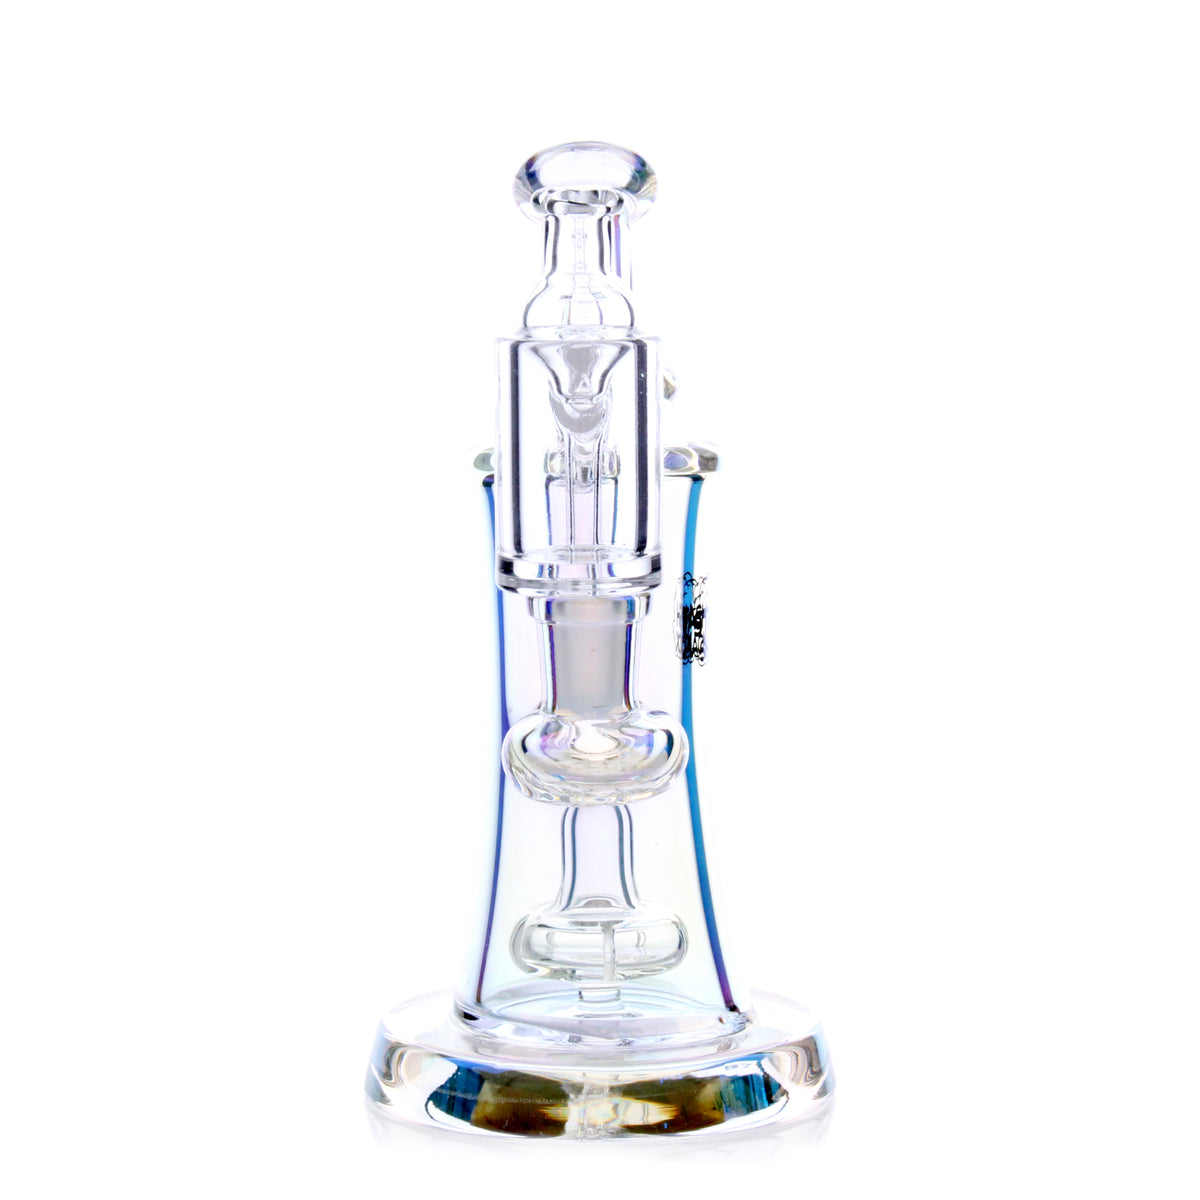 Elysian Mini Rig by The Stash Shack, front view, compact 5.5" borosilicate glass dab rig for concentrates